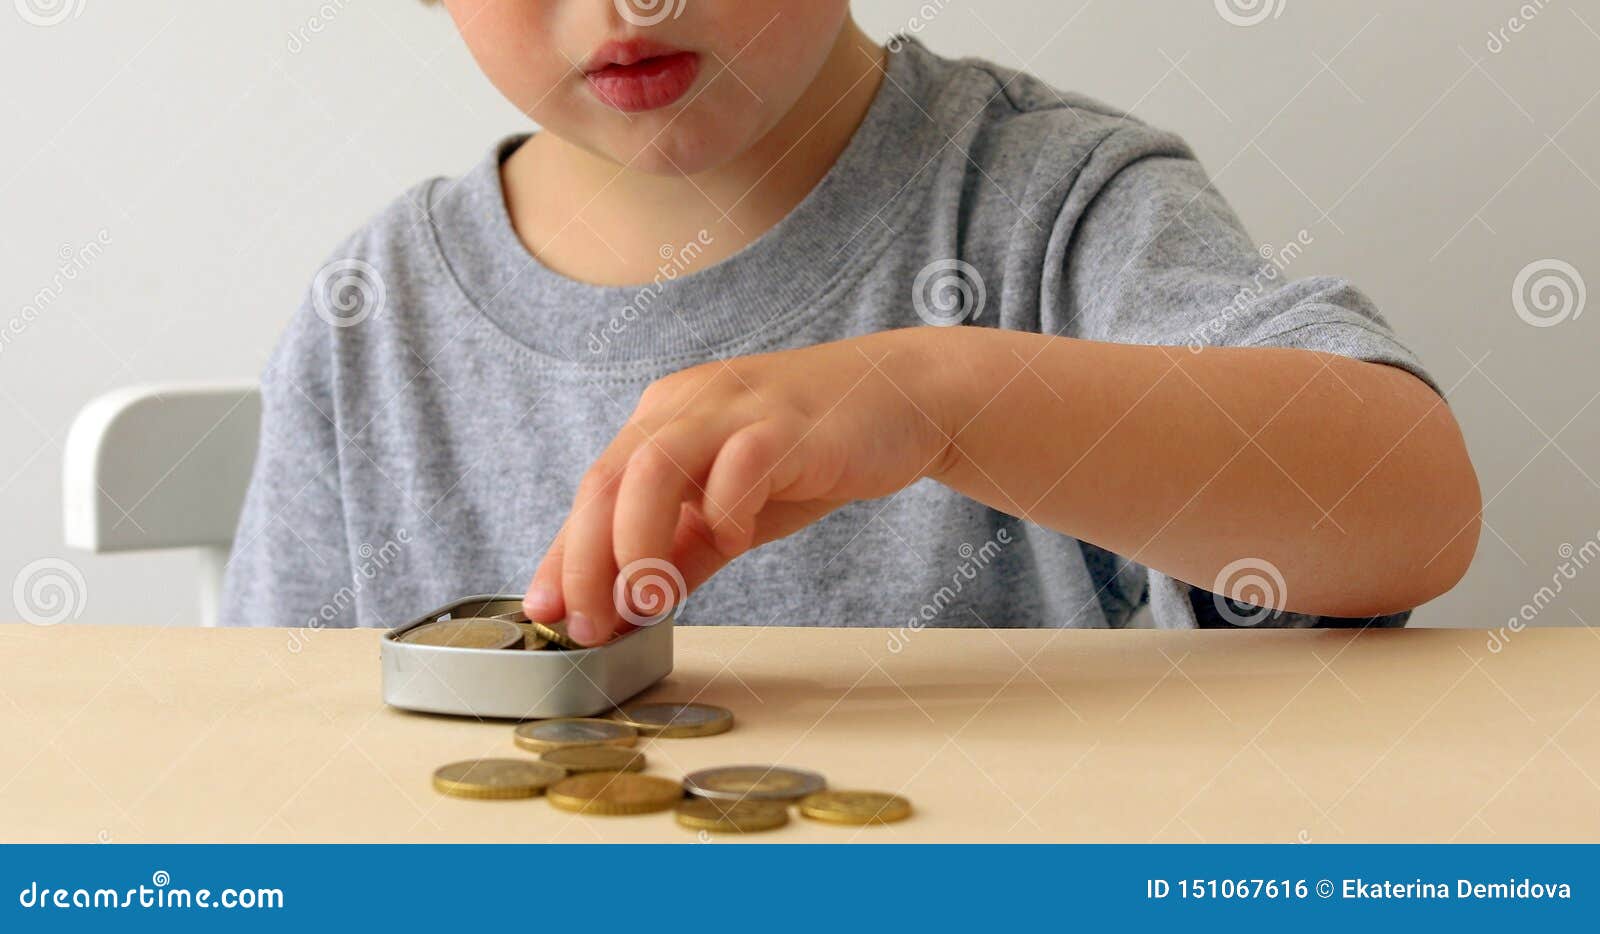 Children with Saving Money for Education Stock Photo - Image of child